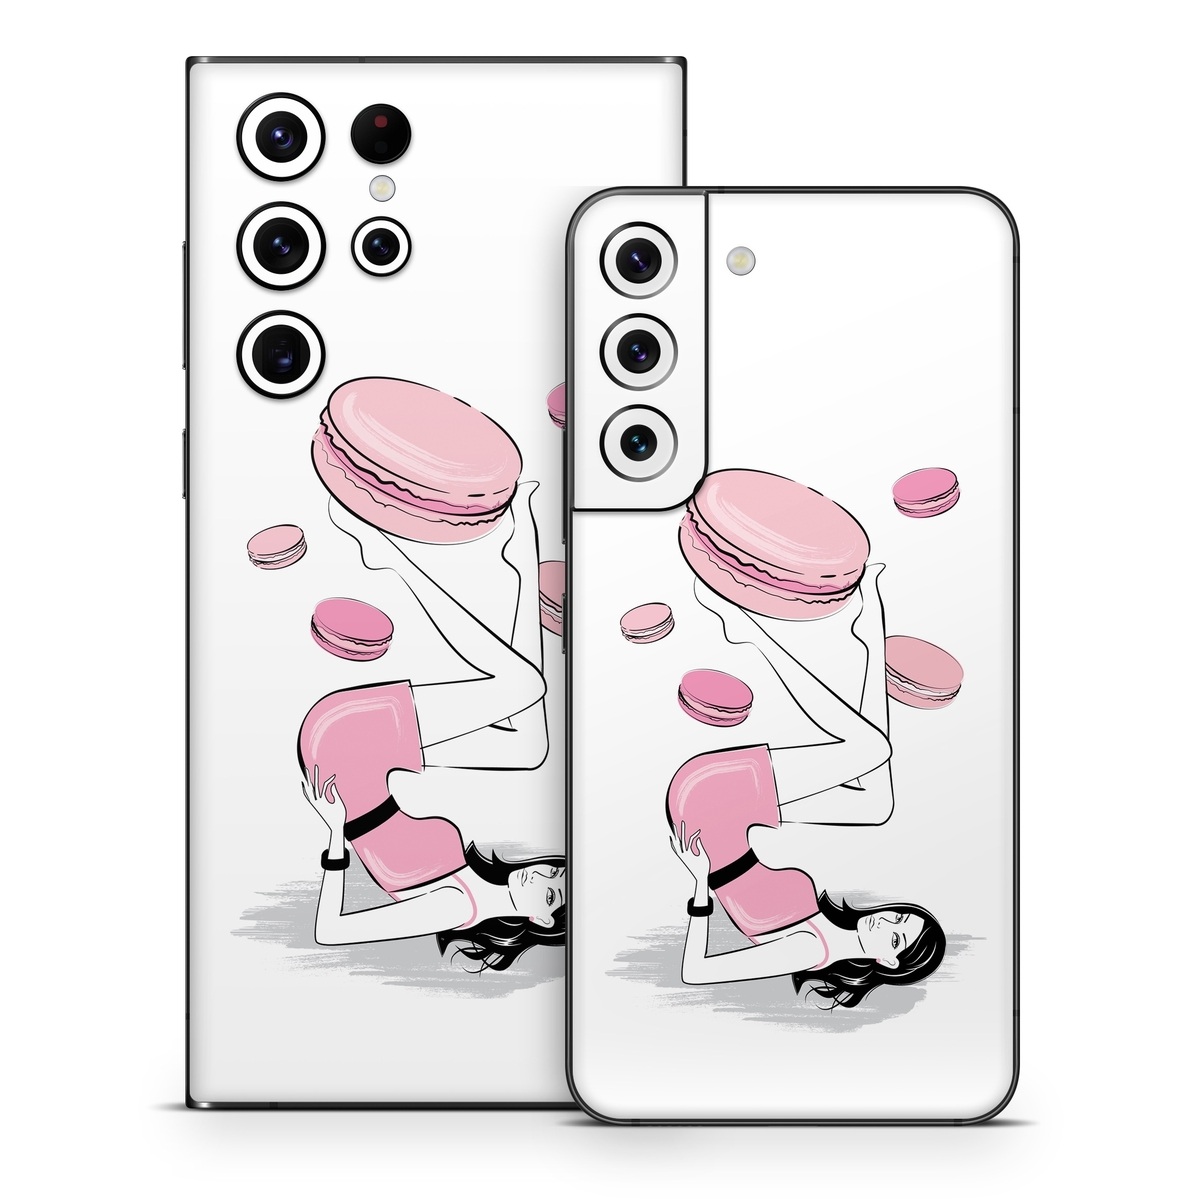 Samsung Galaxy S22 Series Skin design of Gesture, Pink, Cartoon, Happy, Art, Red, Font, Elbow, Magenta, Thumb, with white, black, pink, gray colors